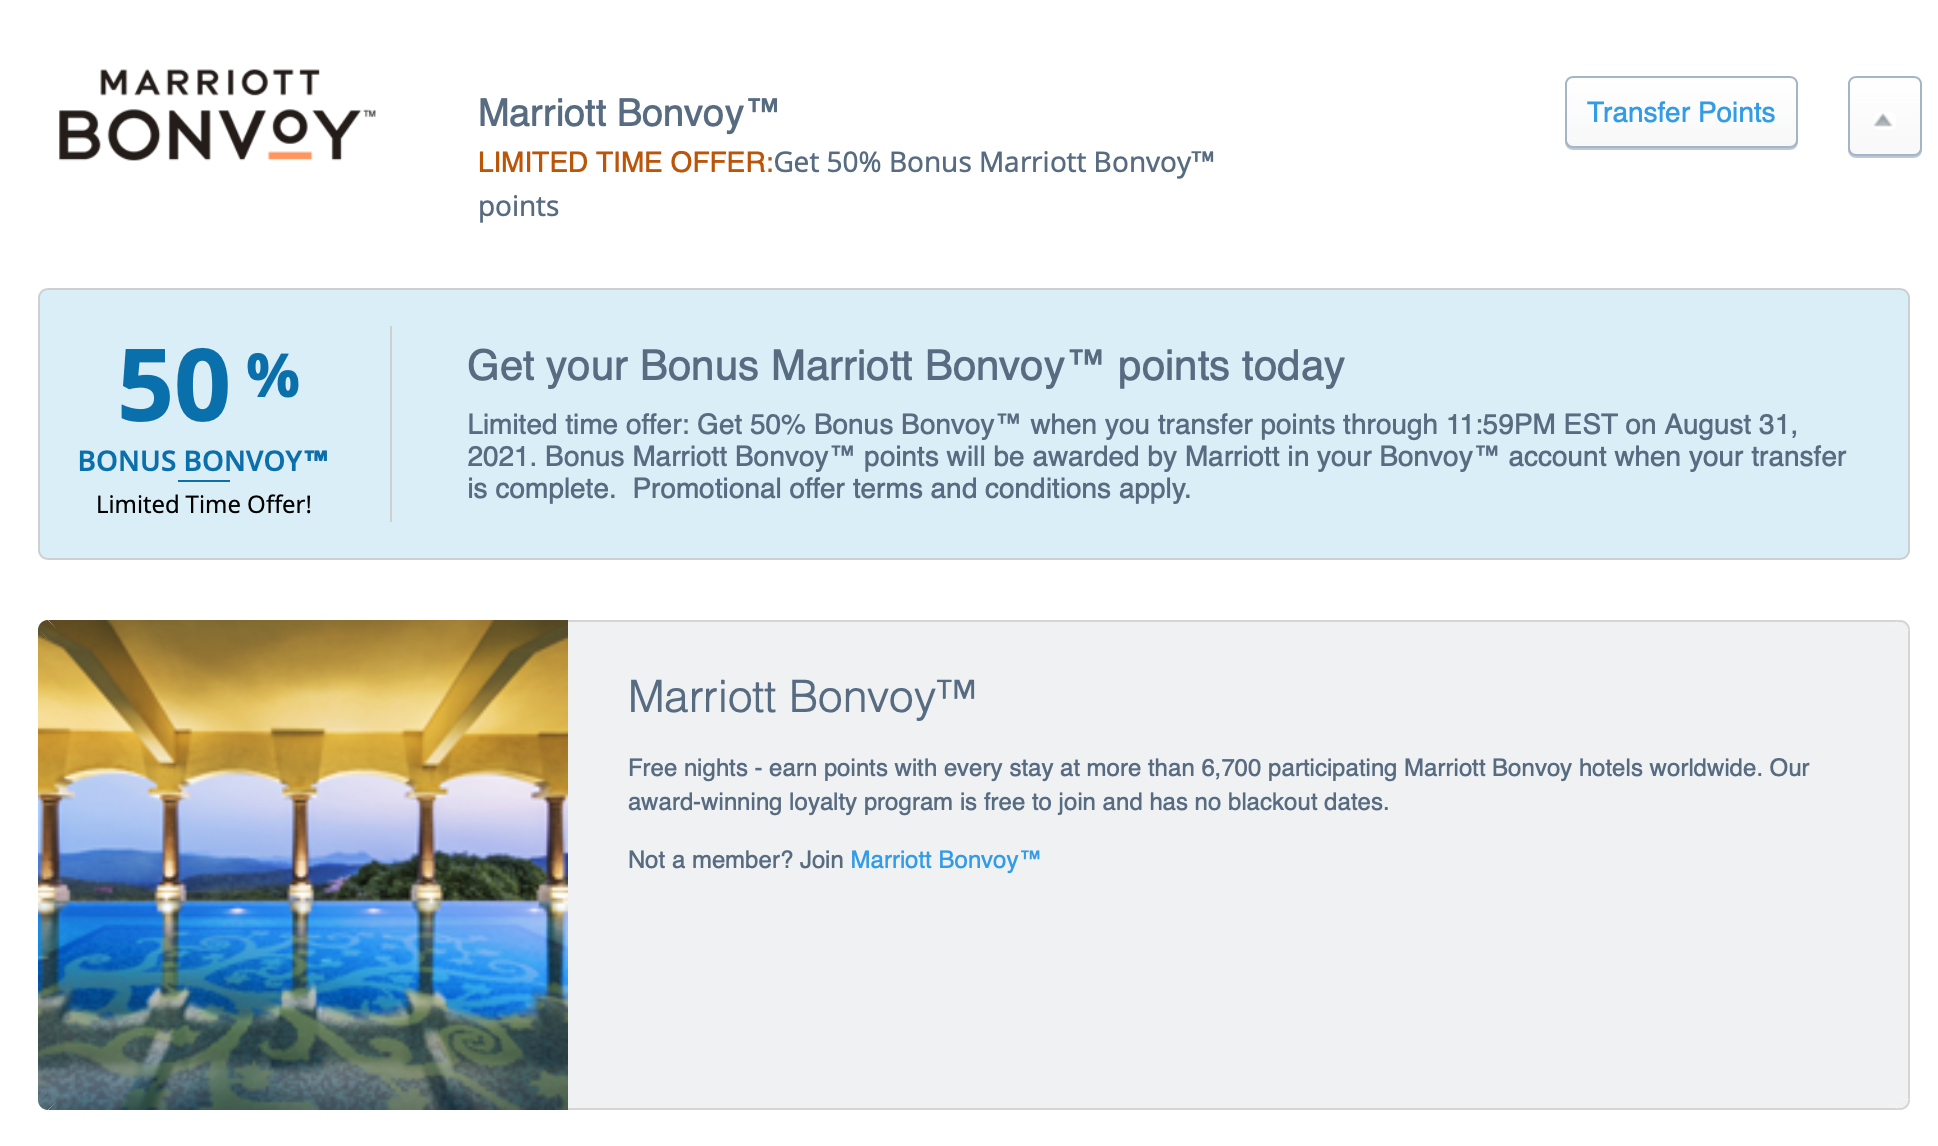 Transfer Chase Ultimate Rewards points to Marriott Bonvoy with a 50